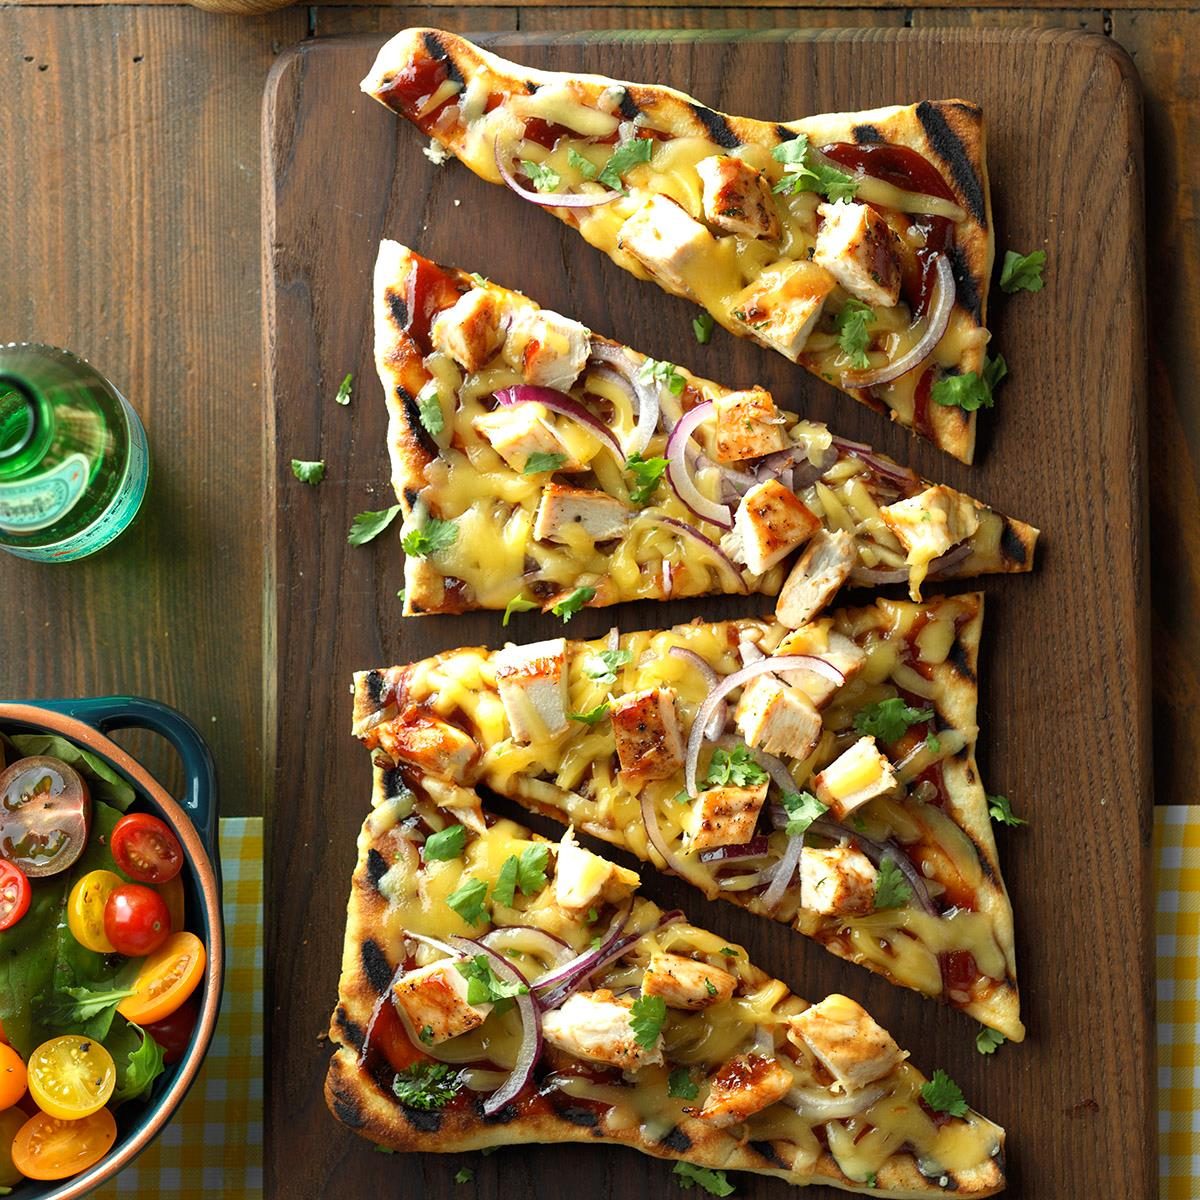 Inspired by: The Original BBQ Chicken Pizza